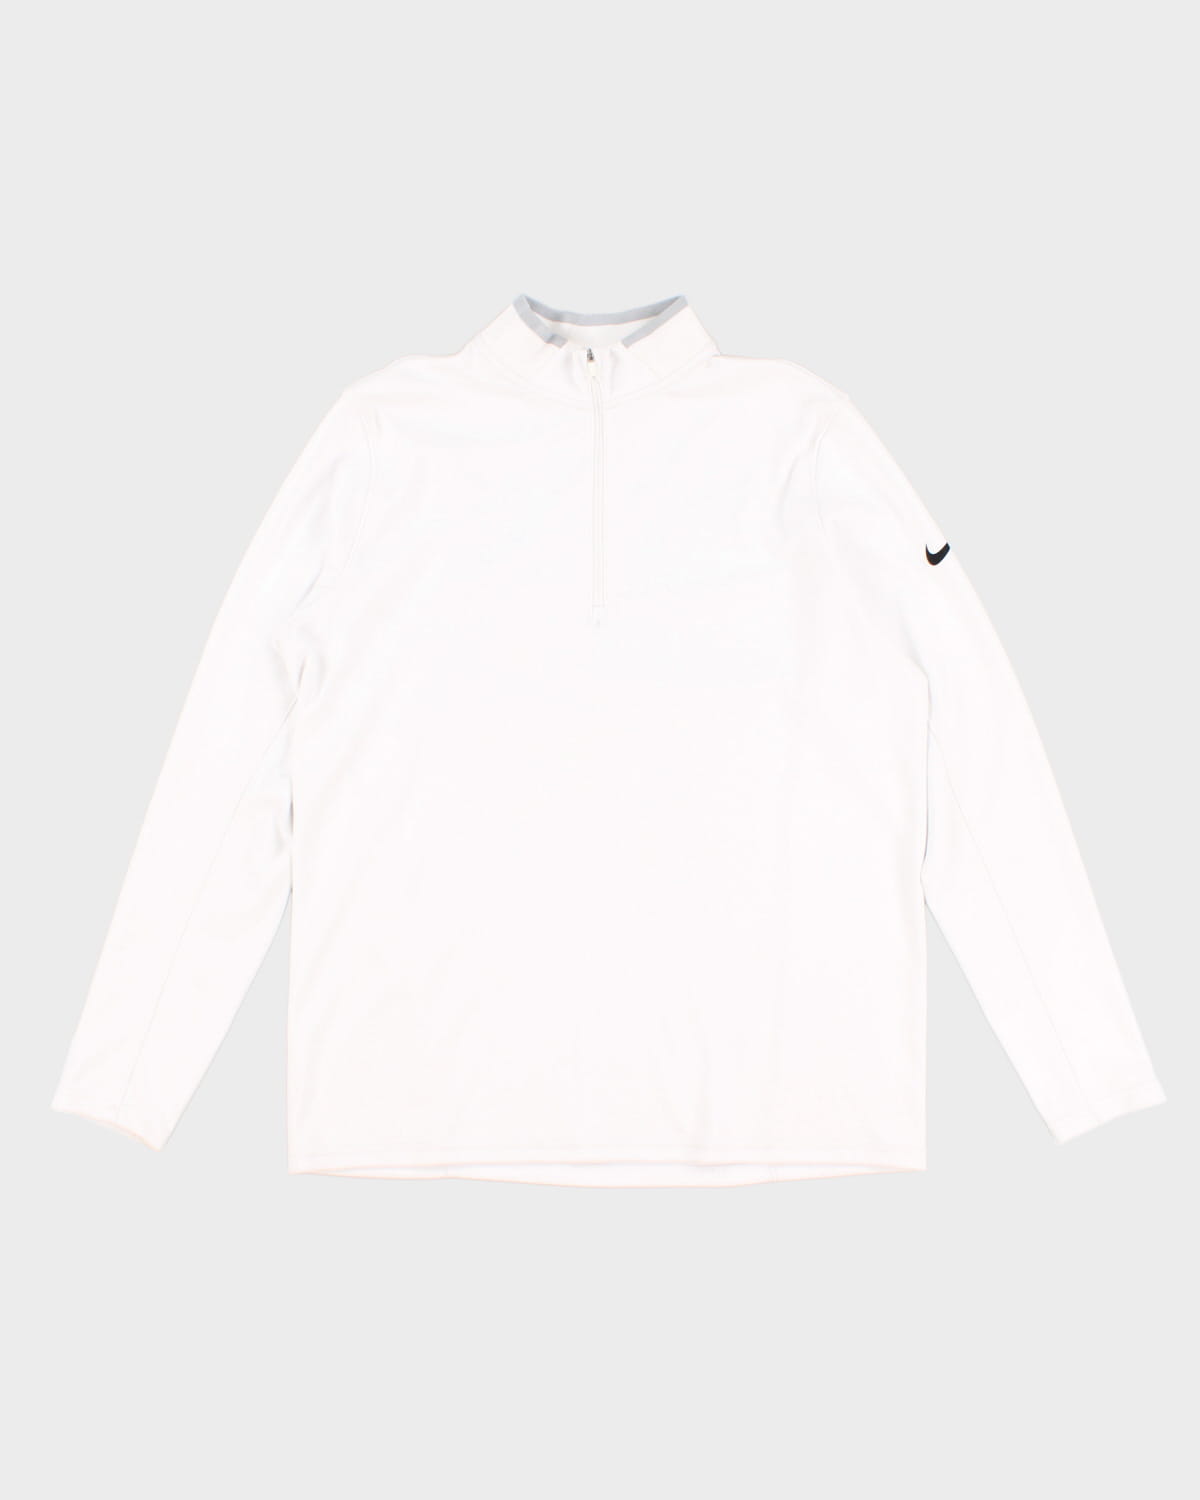 Nike Dry-Fit Long Sleeve - L